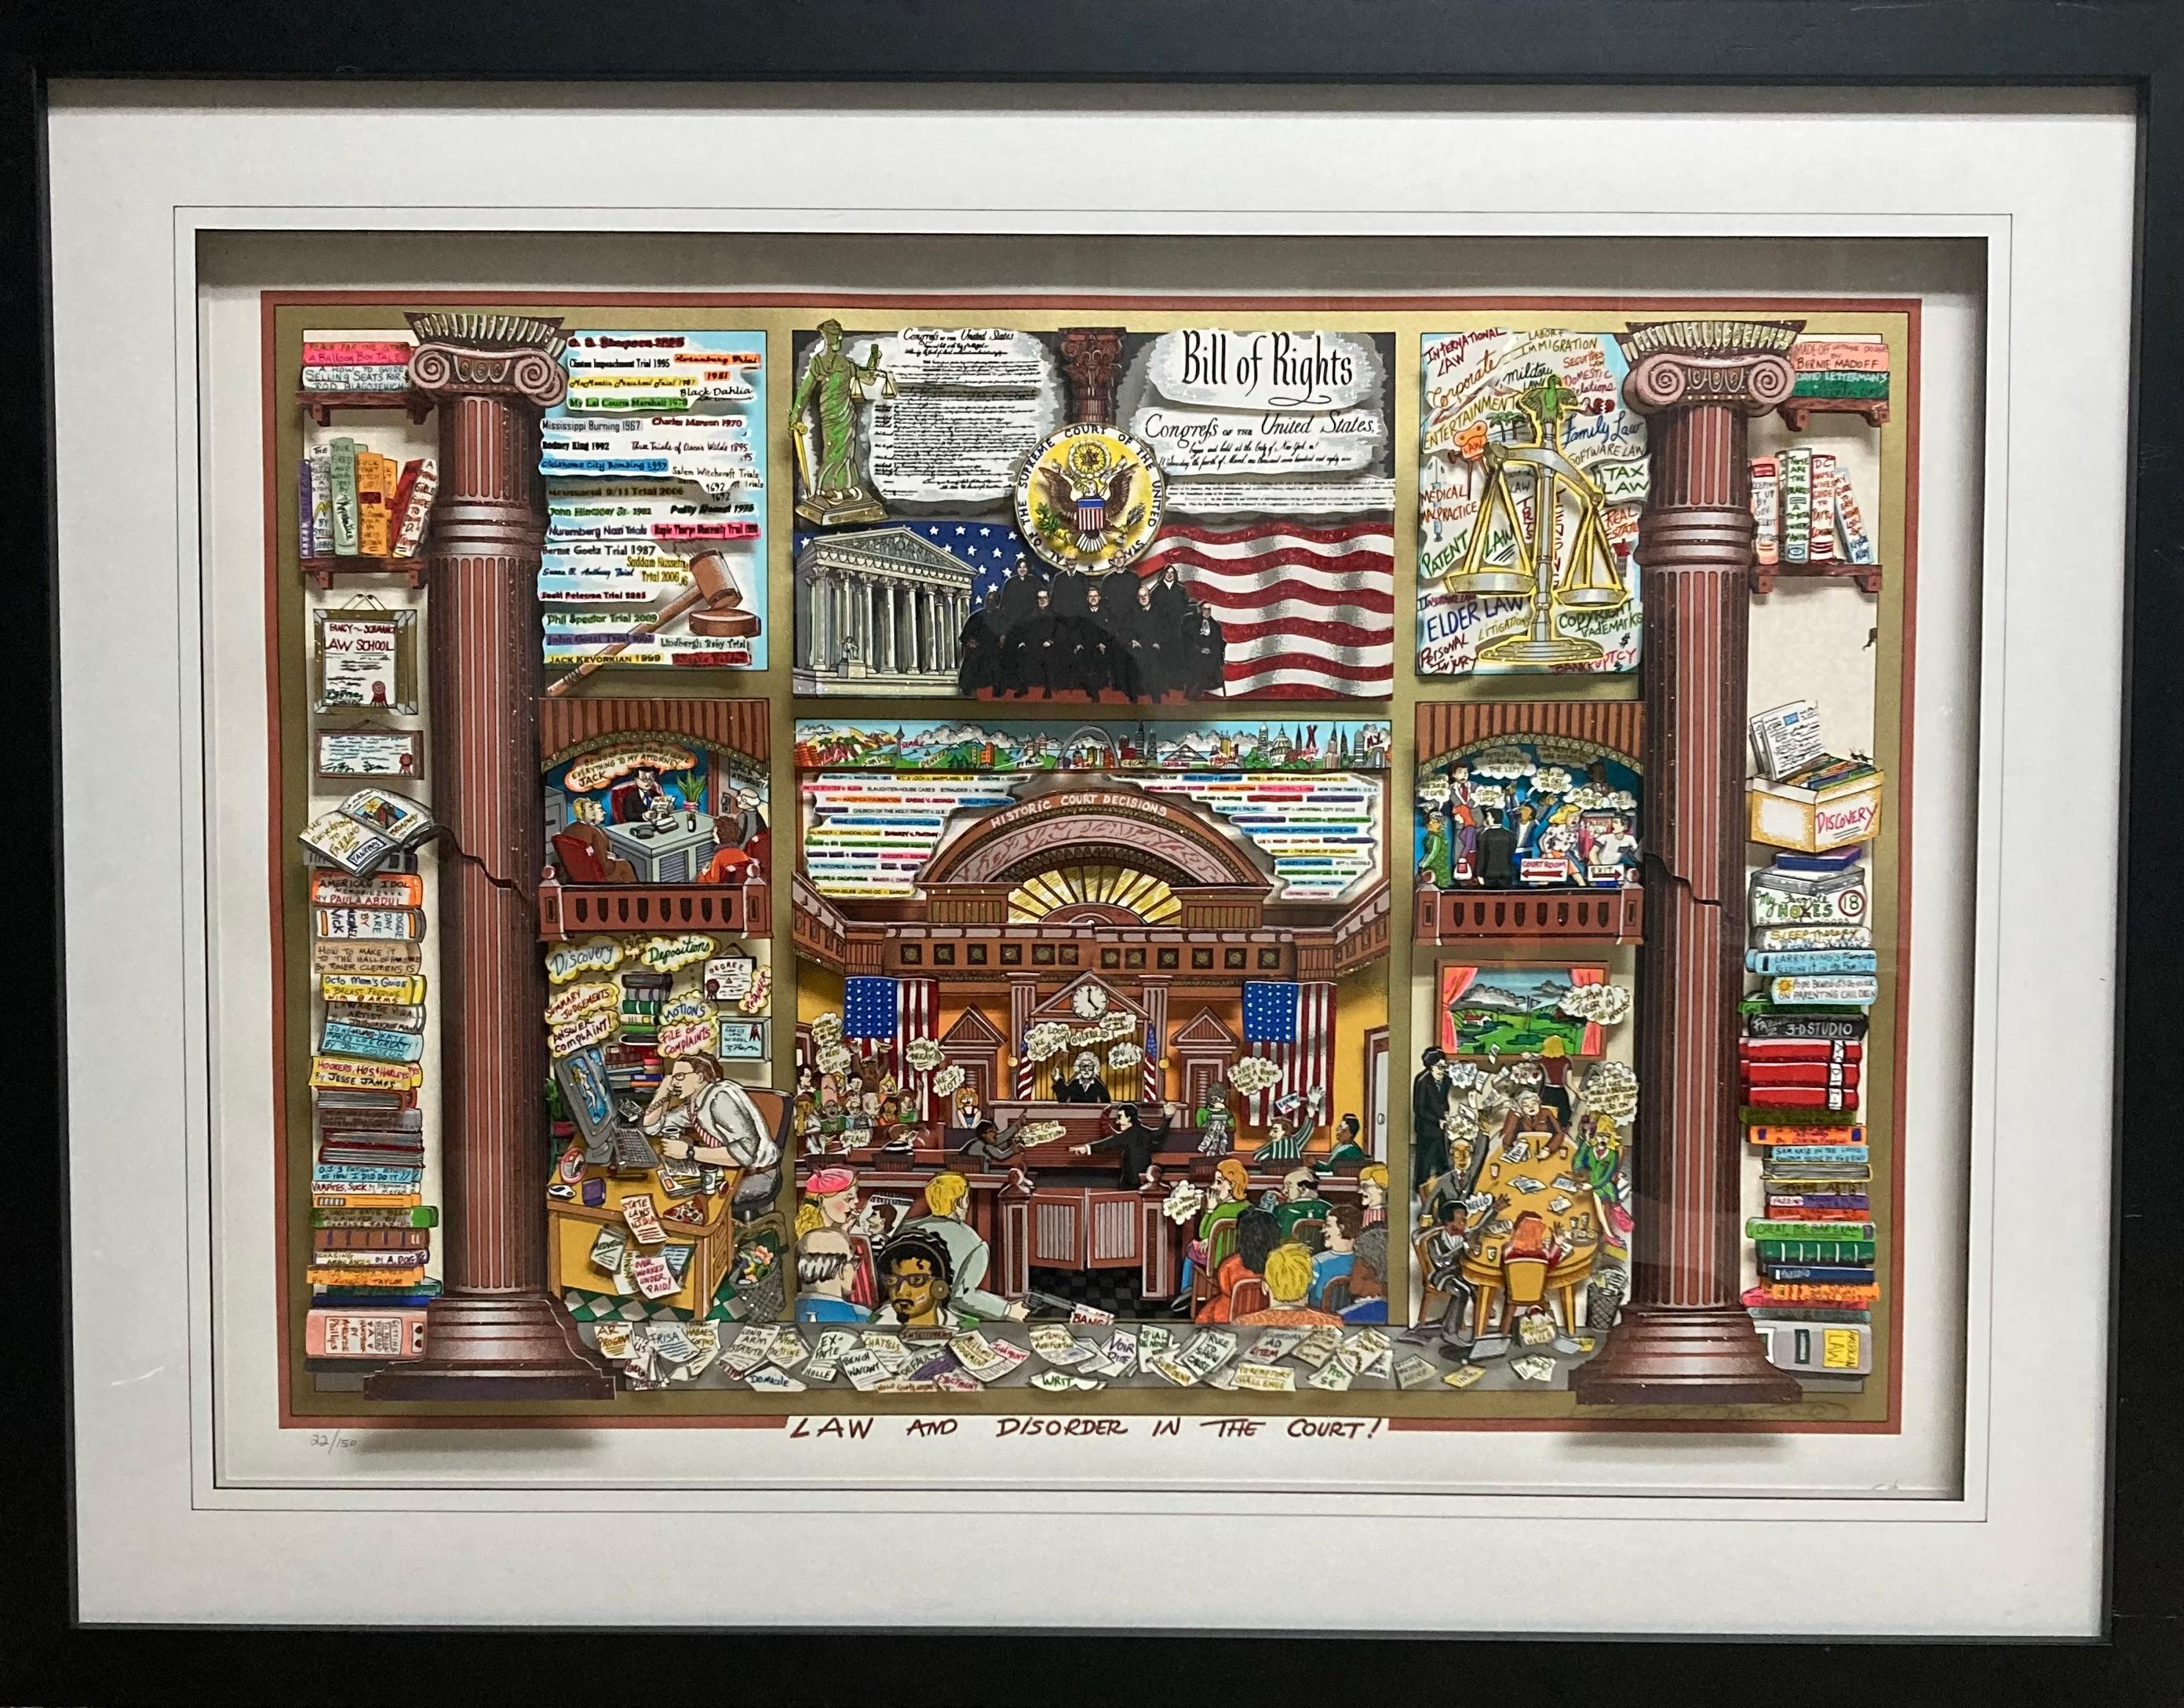 "Law and Disorder" - Print by Charles Fazzino